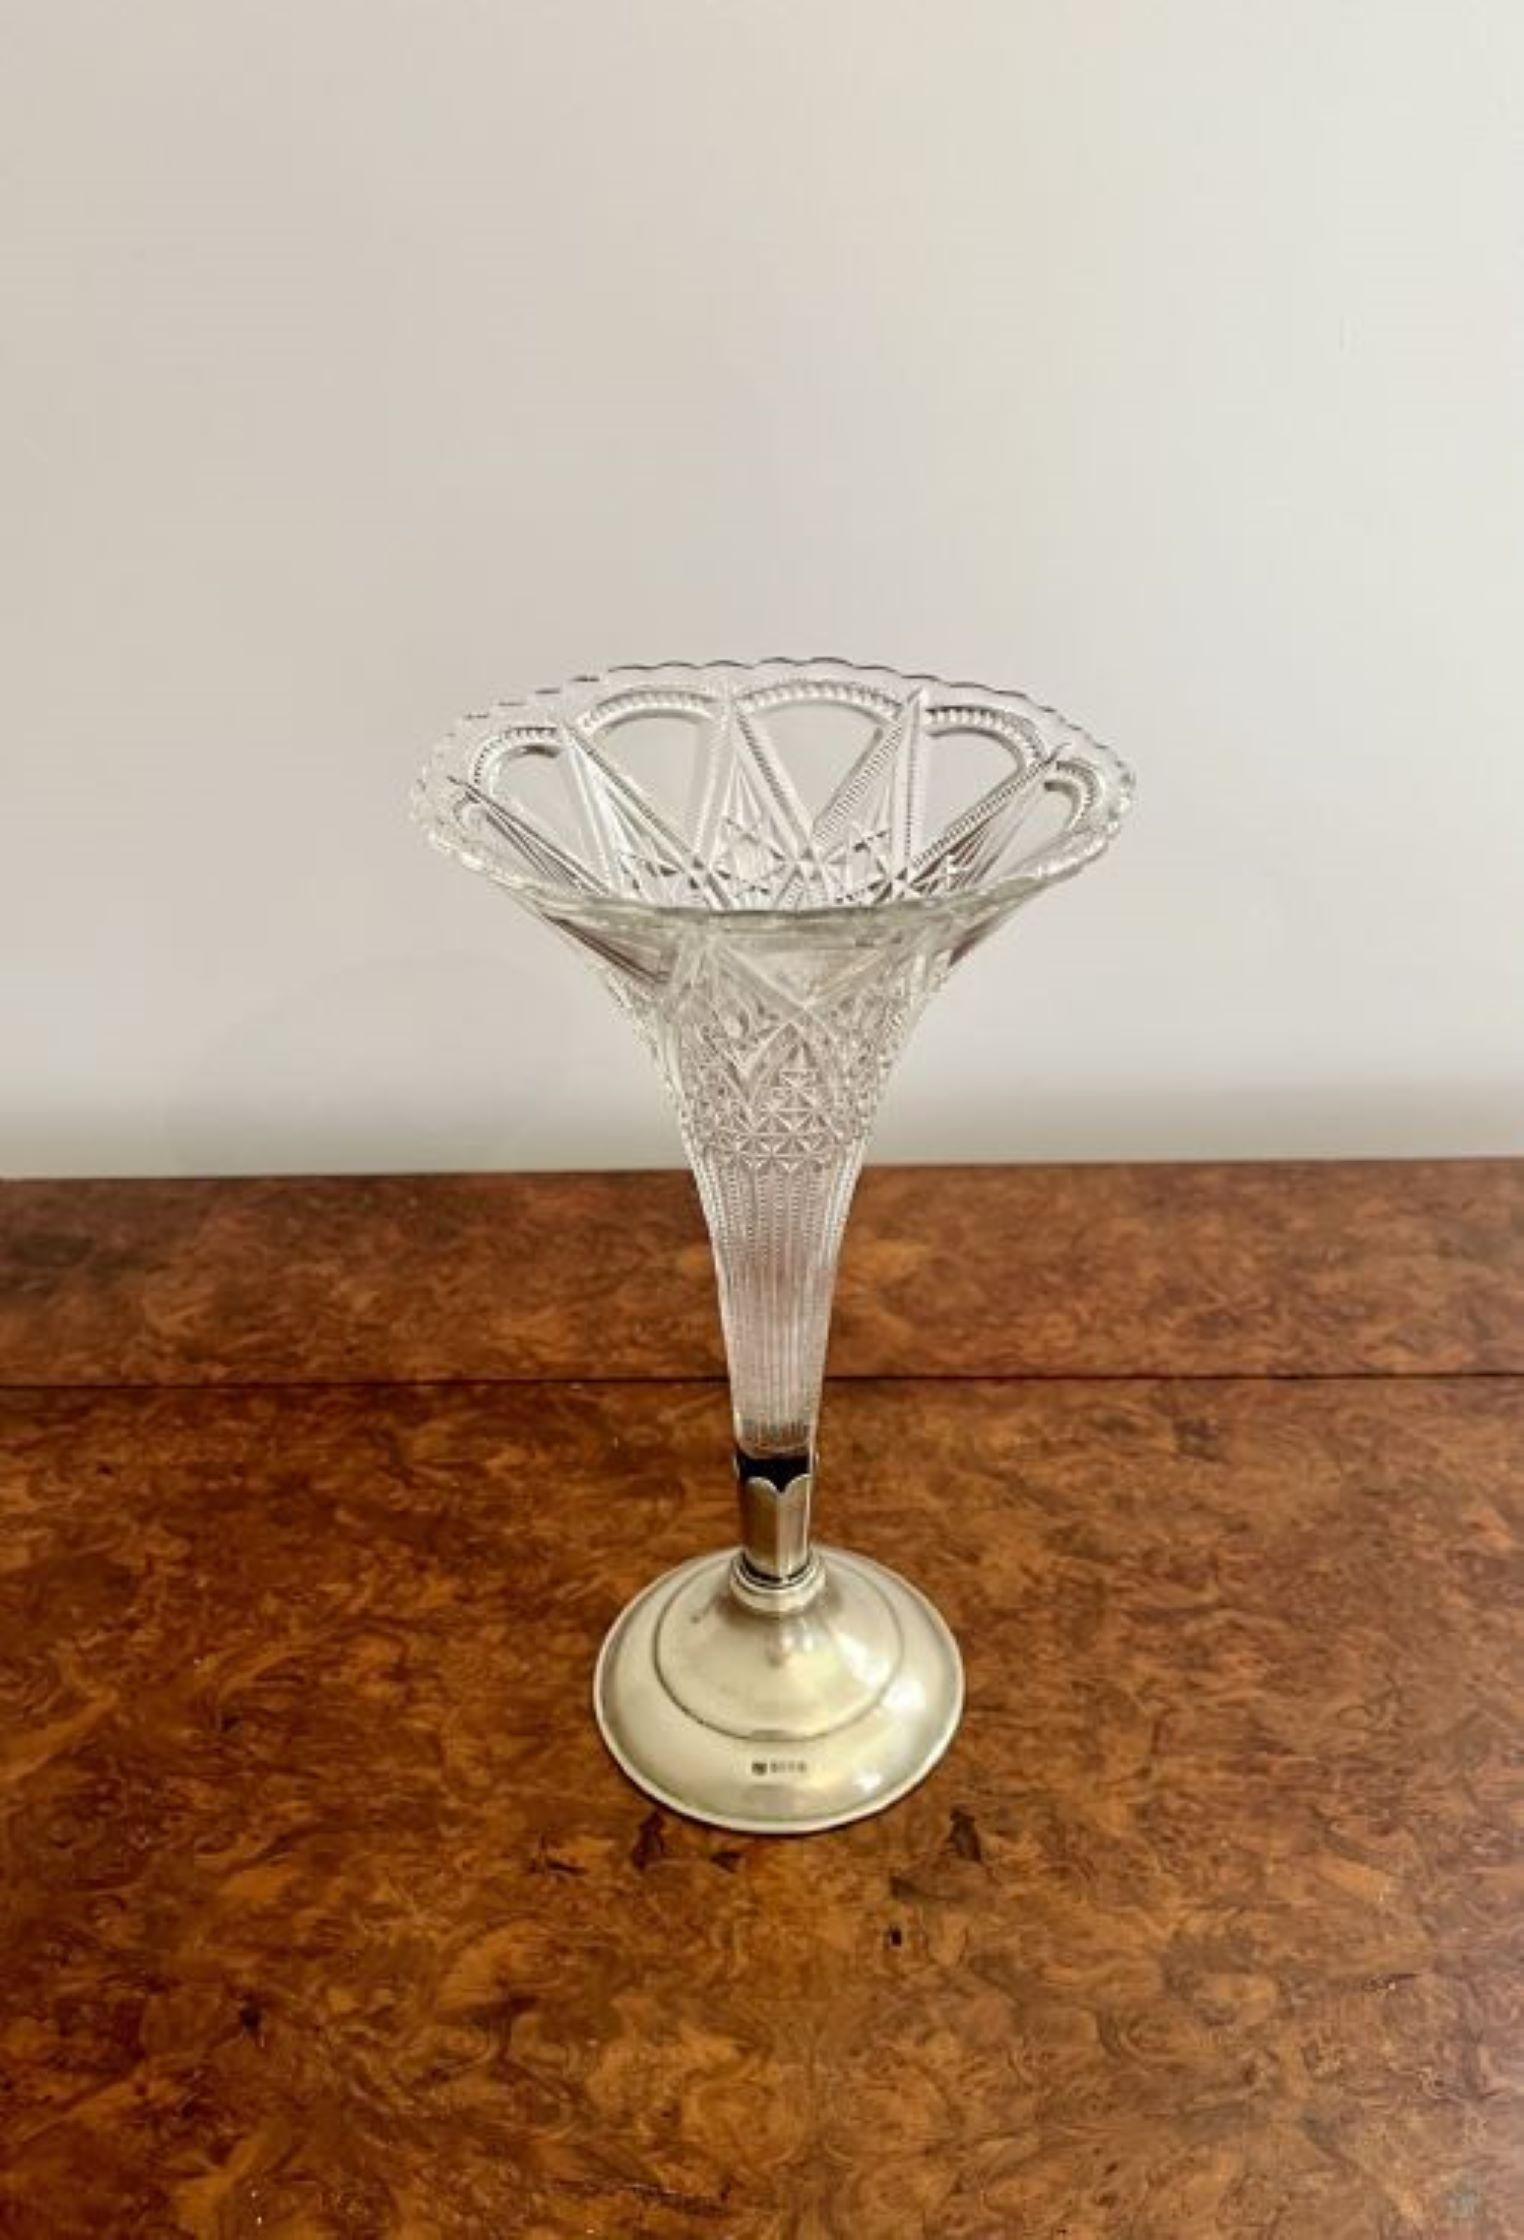 Fine quality antique Edwardian cut glass and silver plated fluted spill vase having a fine quality Edwardian spill vase with a cut glass body, fluted shape standing on a silver plated circular base. EPNS